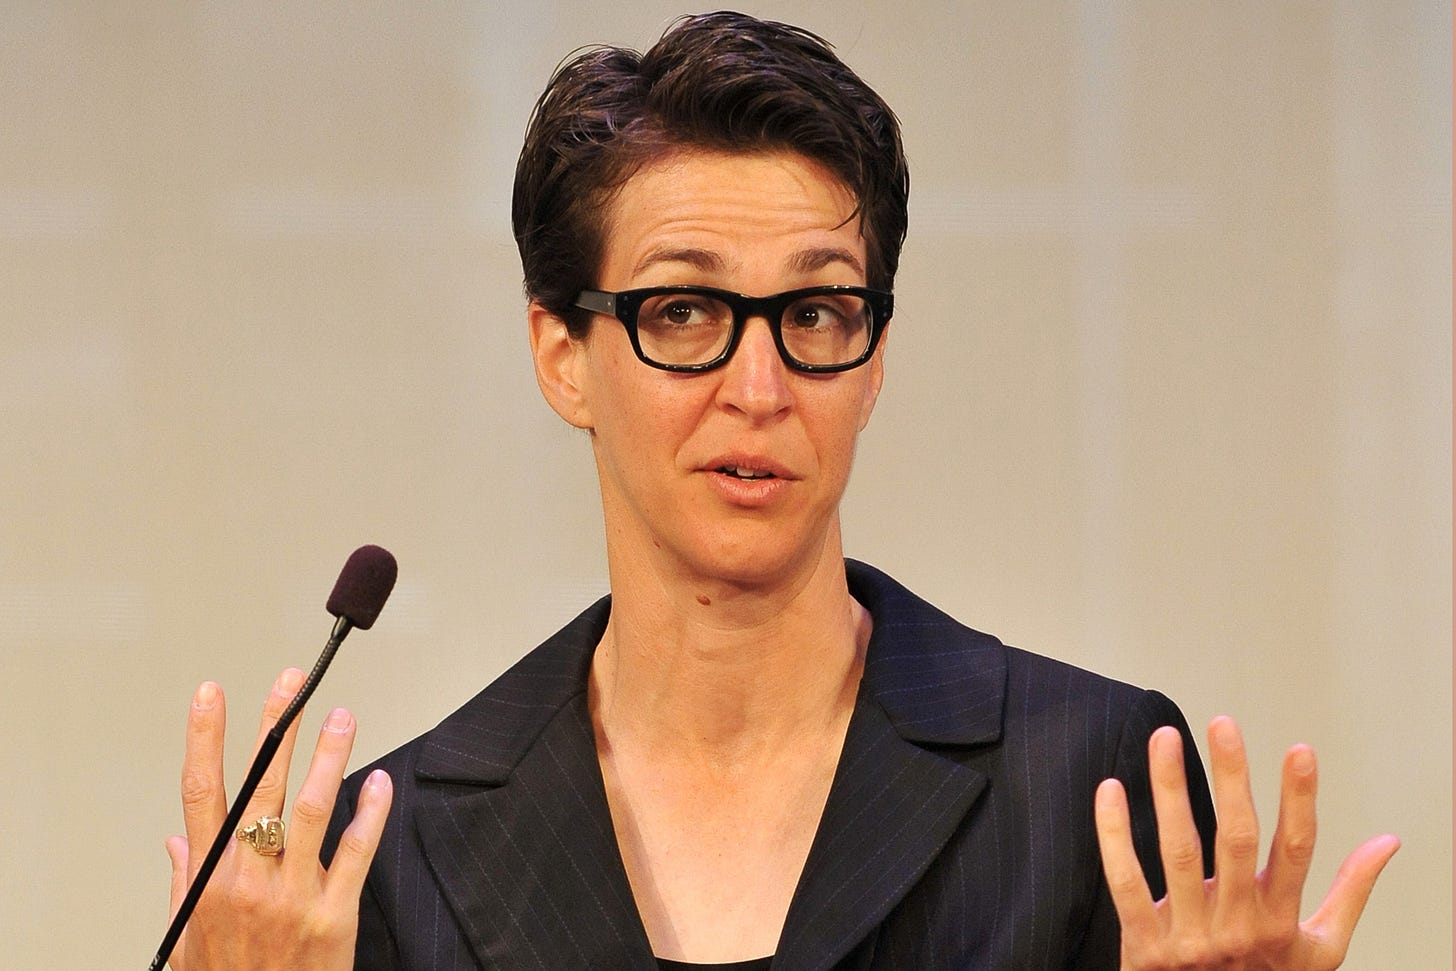 Rachel Maddow's lifelong battle with depression explored in new biography